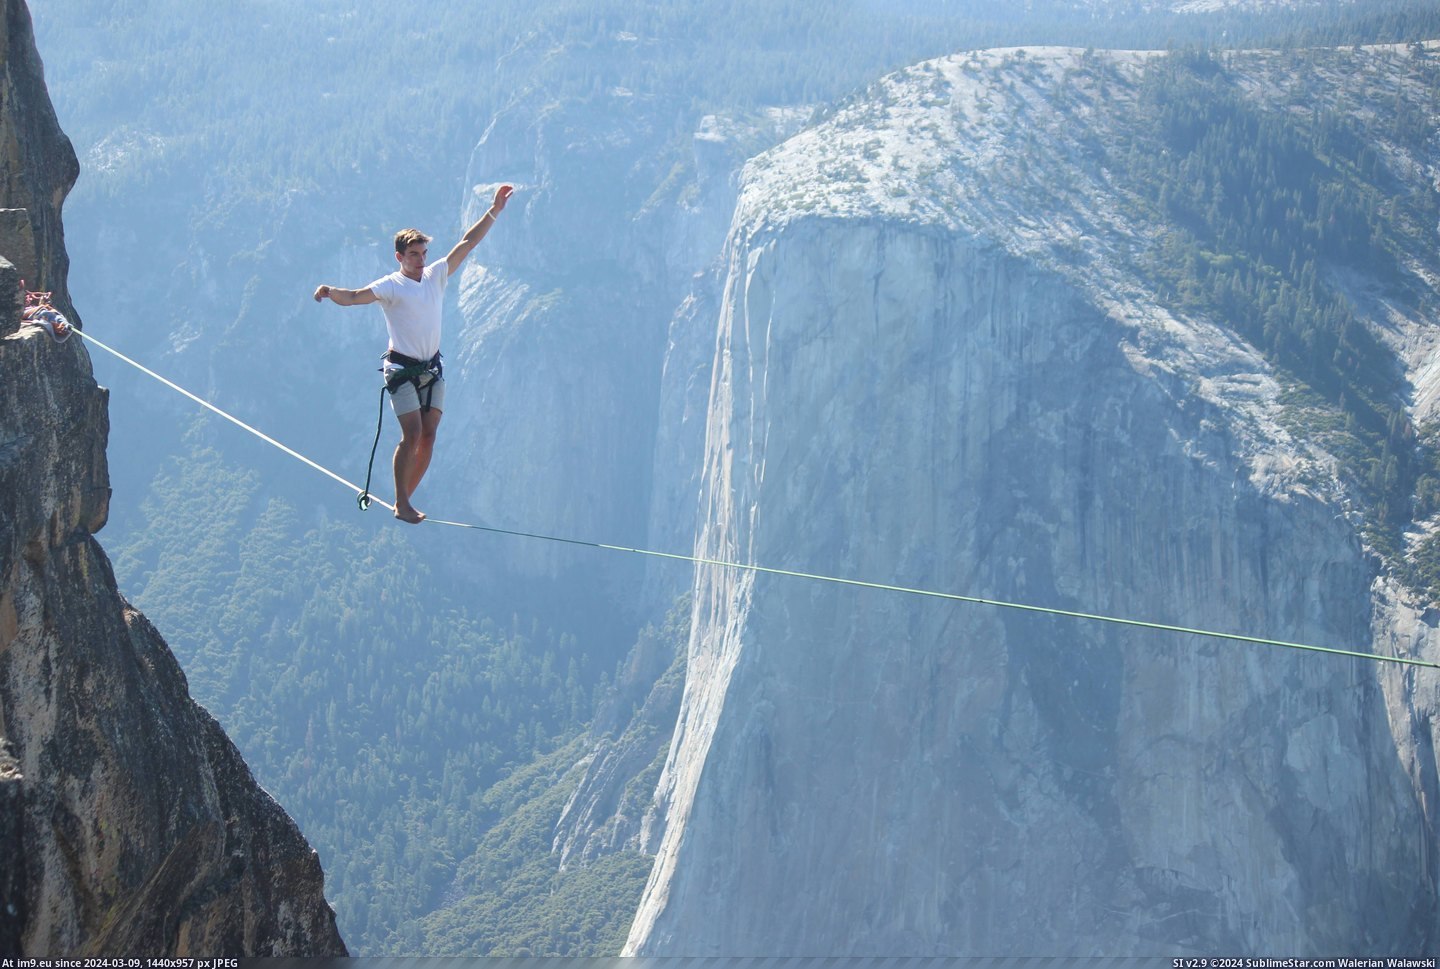 #Time #Long #Week #Goal #Achieved #Backgro #Highlining #Yosemite #Line #Capitan [Pics] I achieved my long-time goal of highlining in Yosemite this week. Here's me on a 100' line with El Capitan in the backgro Pic. (Image of album My r/PICS favs))